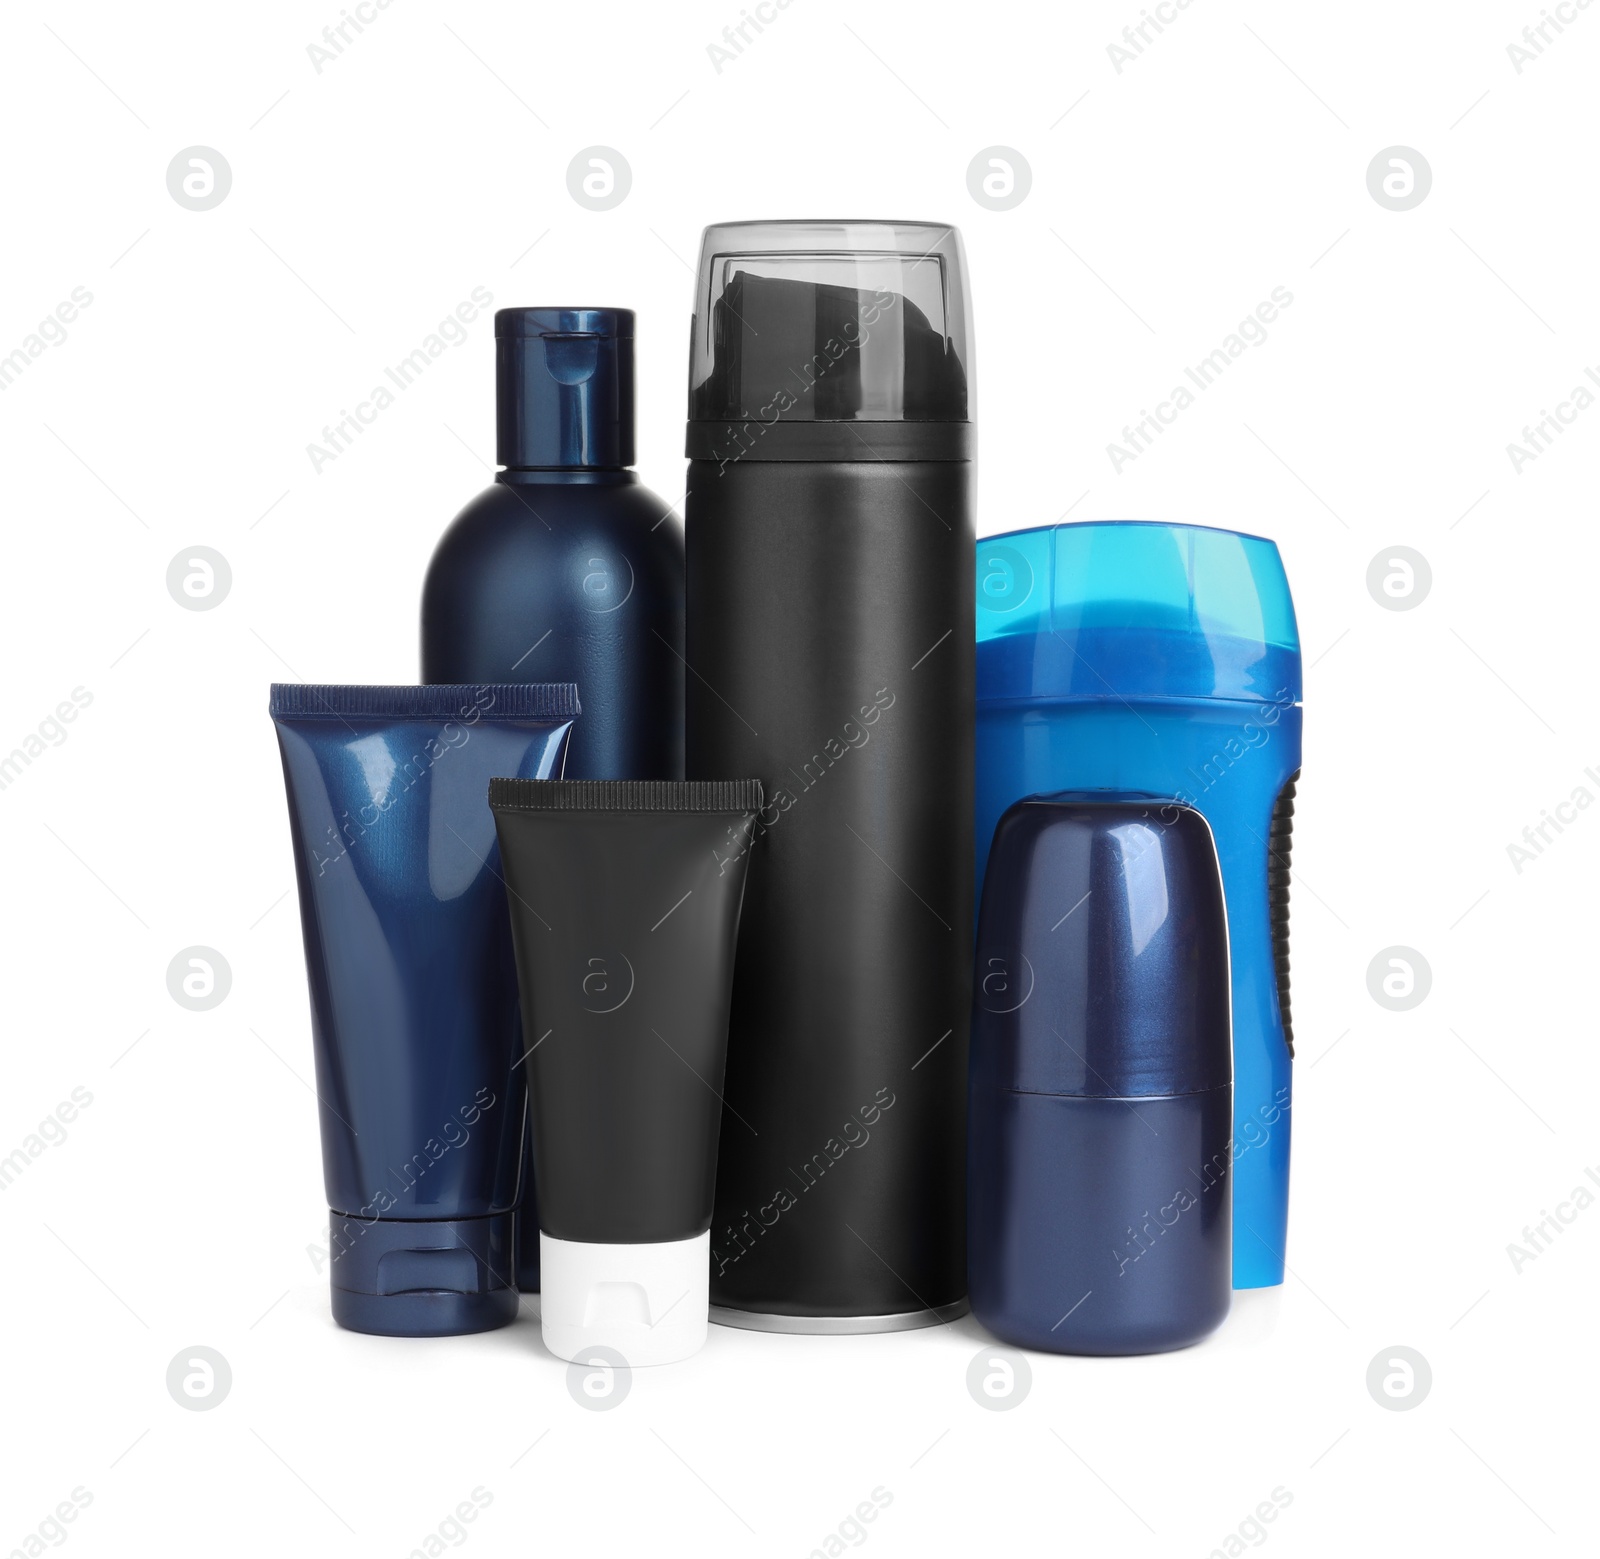 Photo of Facial cream and other men's cosmetic on white background. Mockup for design